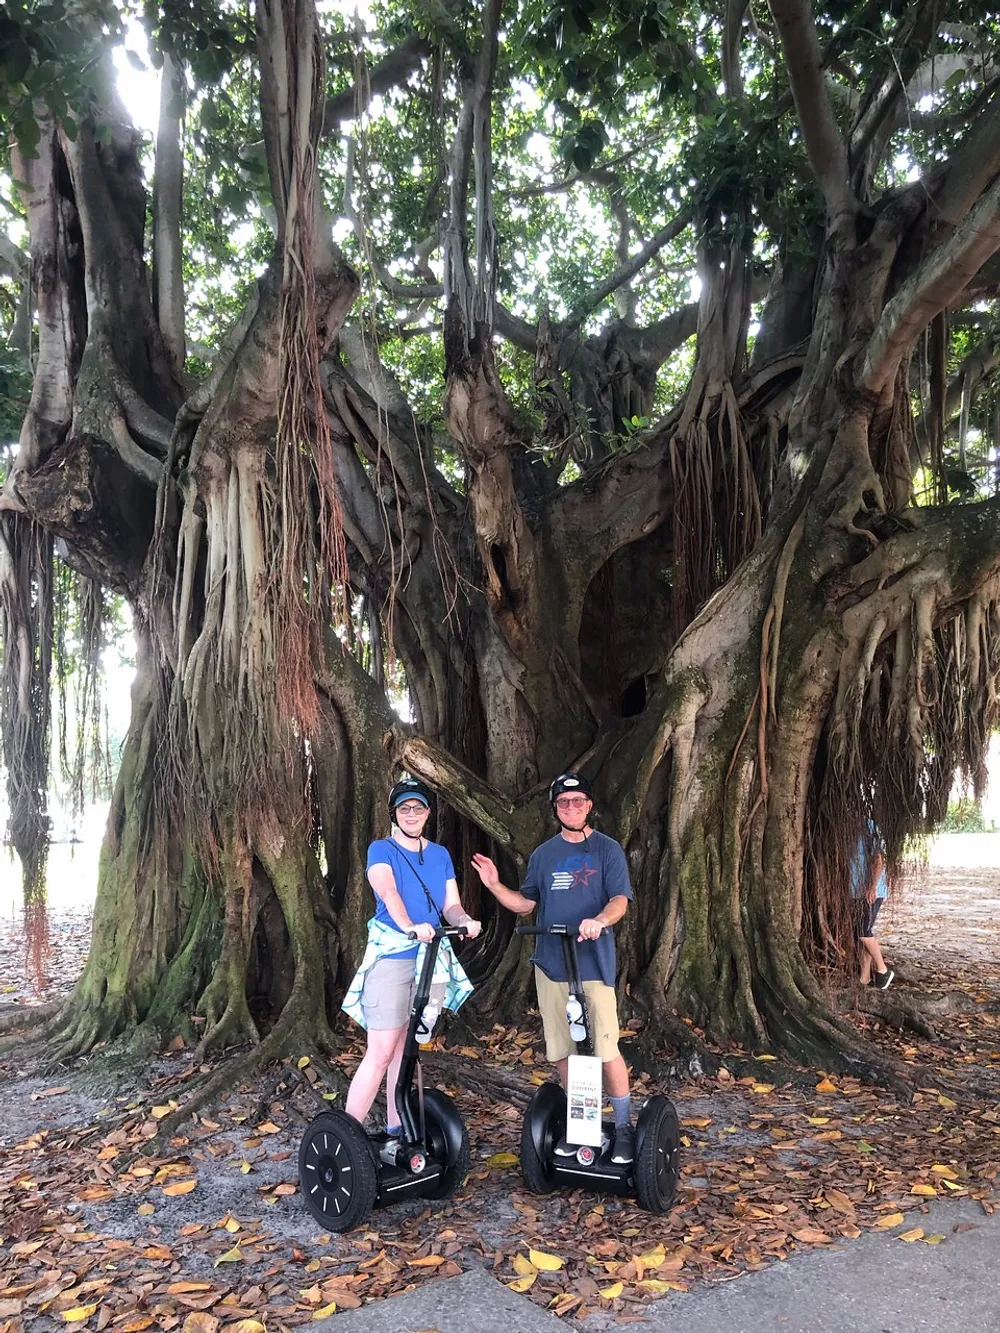 Two people wearing helmets are standing beside Segways in front of a large banyan tree with extensive aerial roots